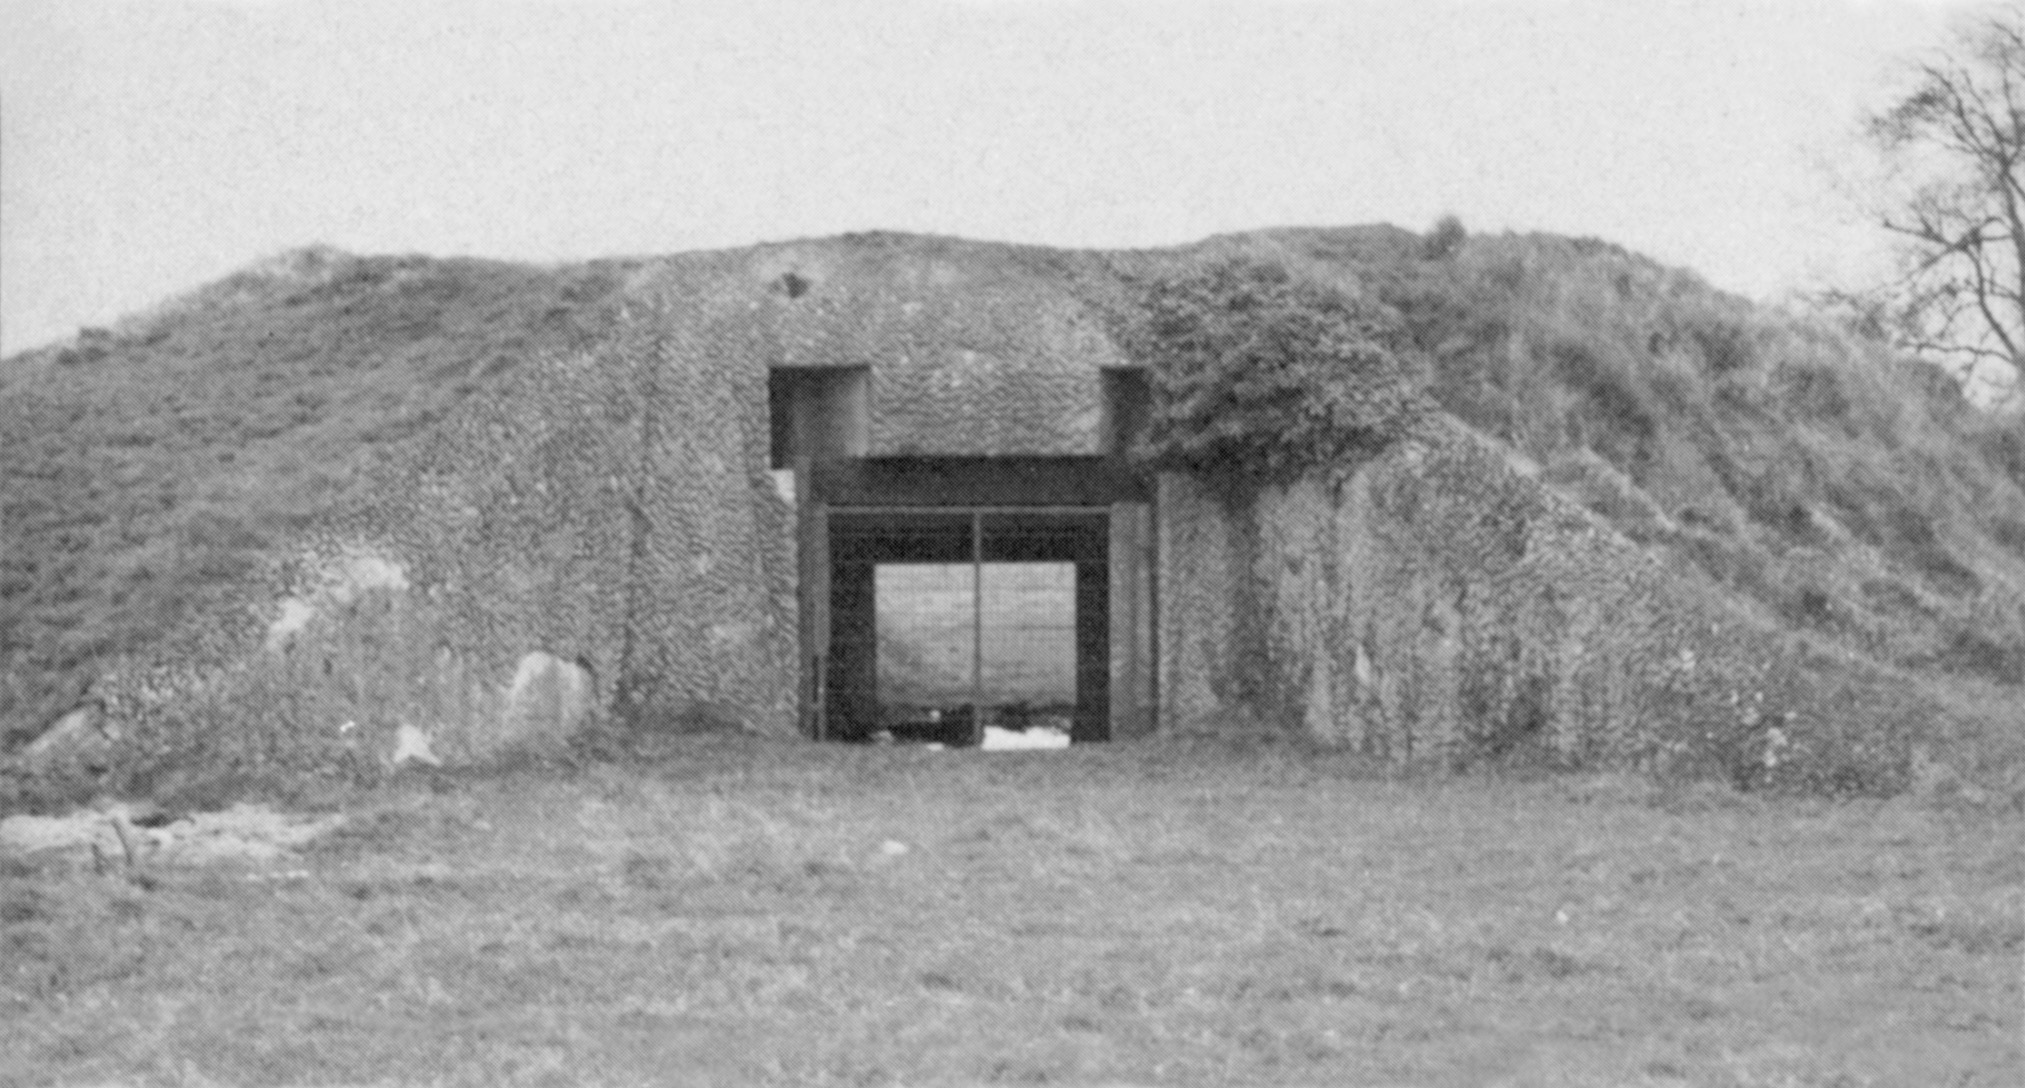 The front of Casemate 1 is shown after the Merville Battery had been silenced and the liberating Allied forces had moved inland.